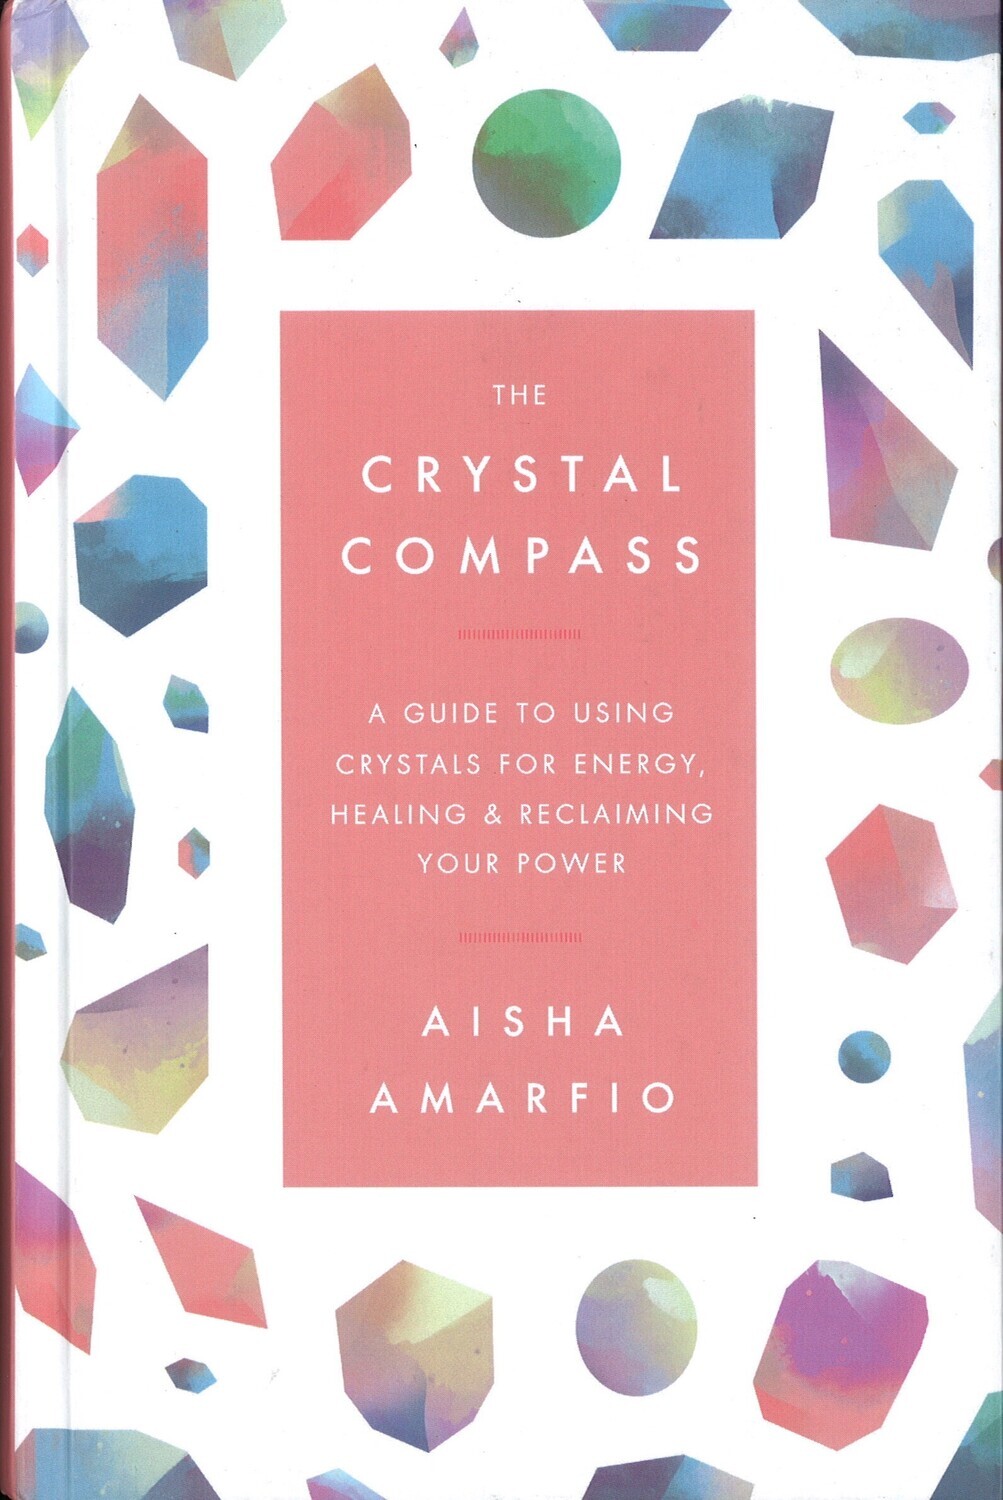 The Crystal Compass